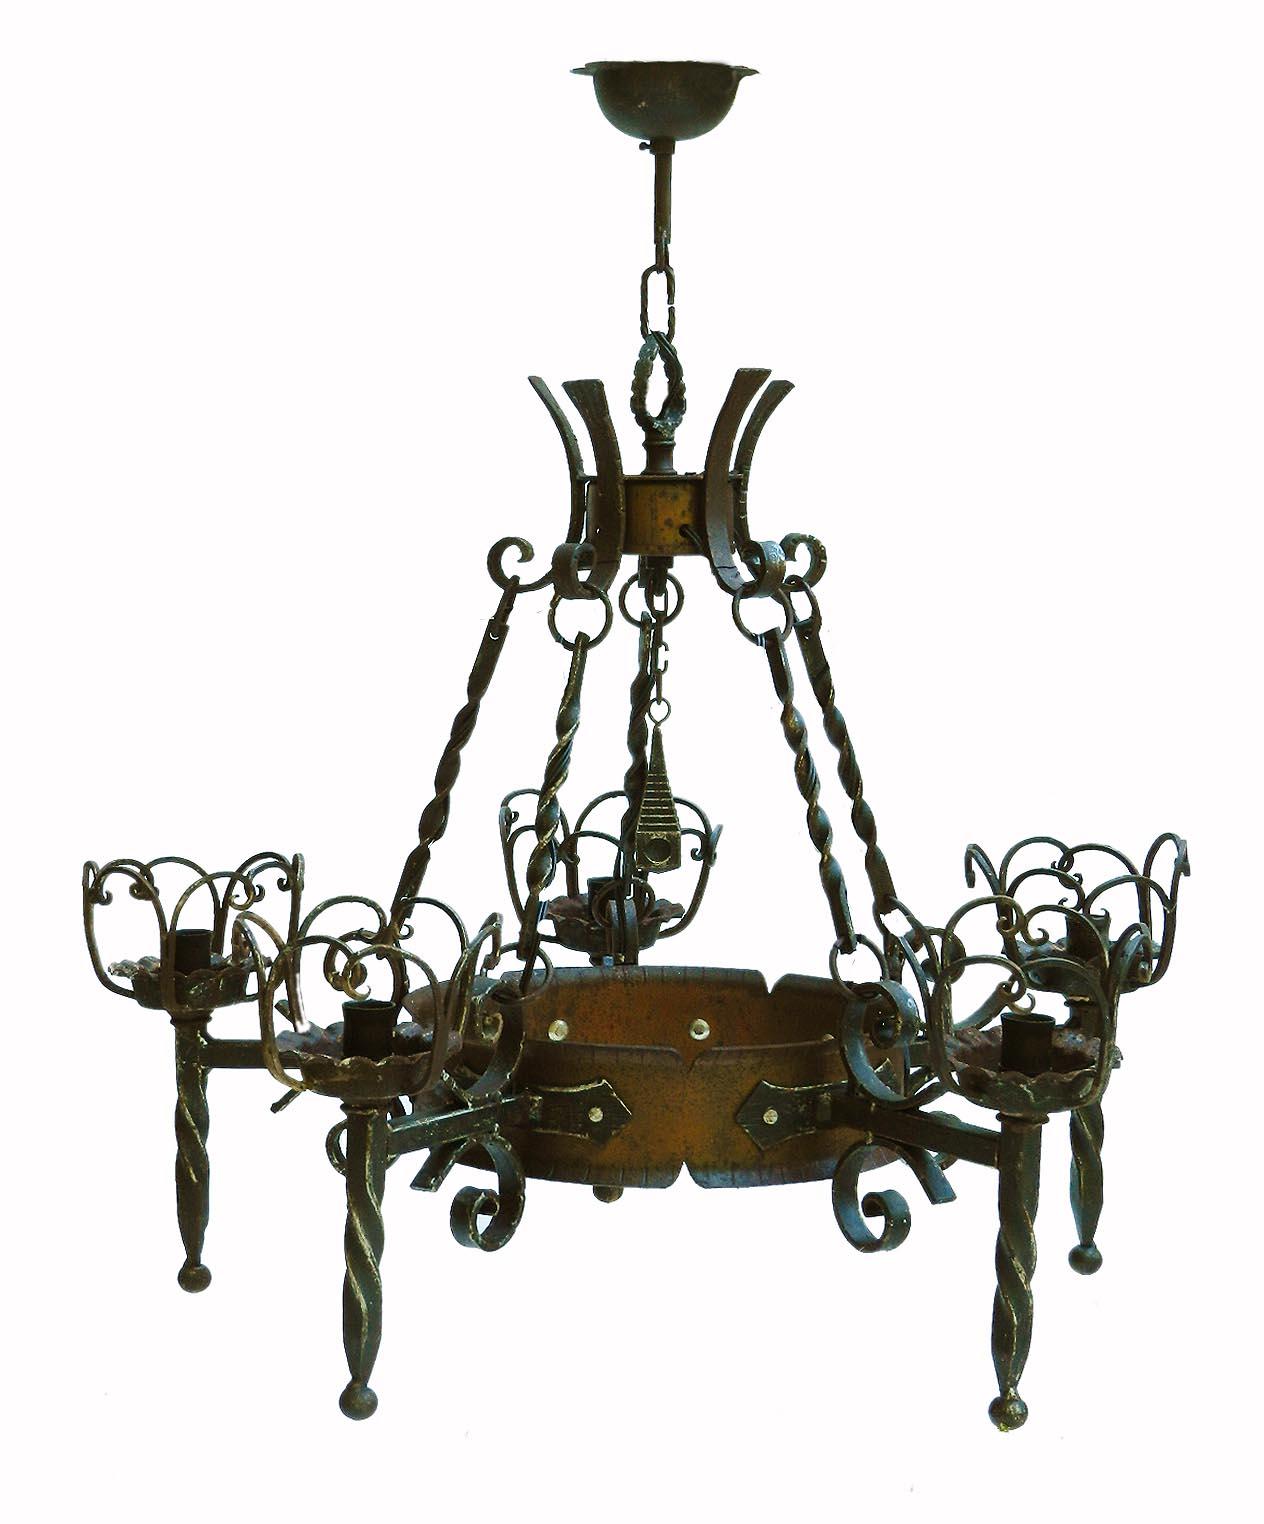 Three Franco Spanish Basque chandeliers wrought iron and copper
graduated trio all removed from the long entrance hall of a large French house
artisan made unusual and unique
The chain can be lengthened on each to increase the drop if